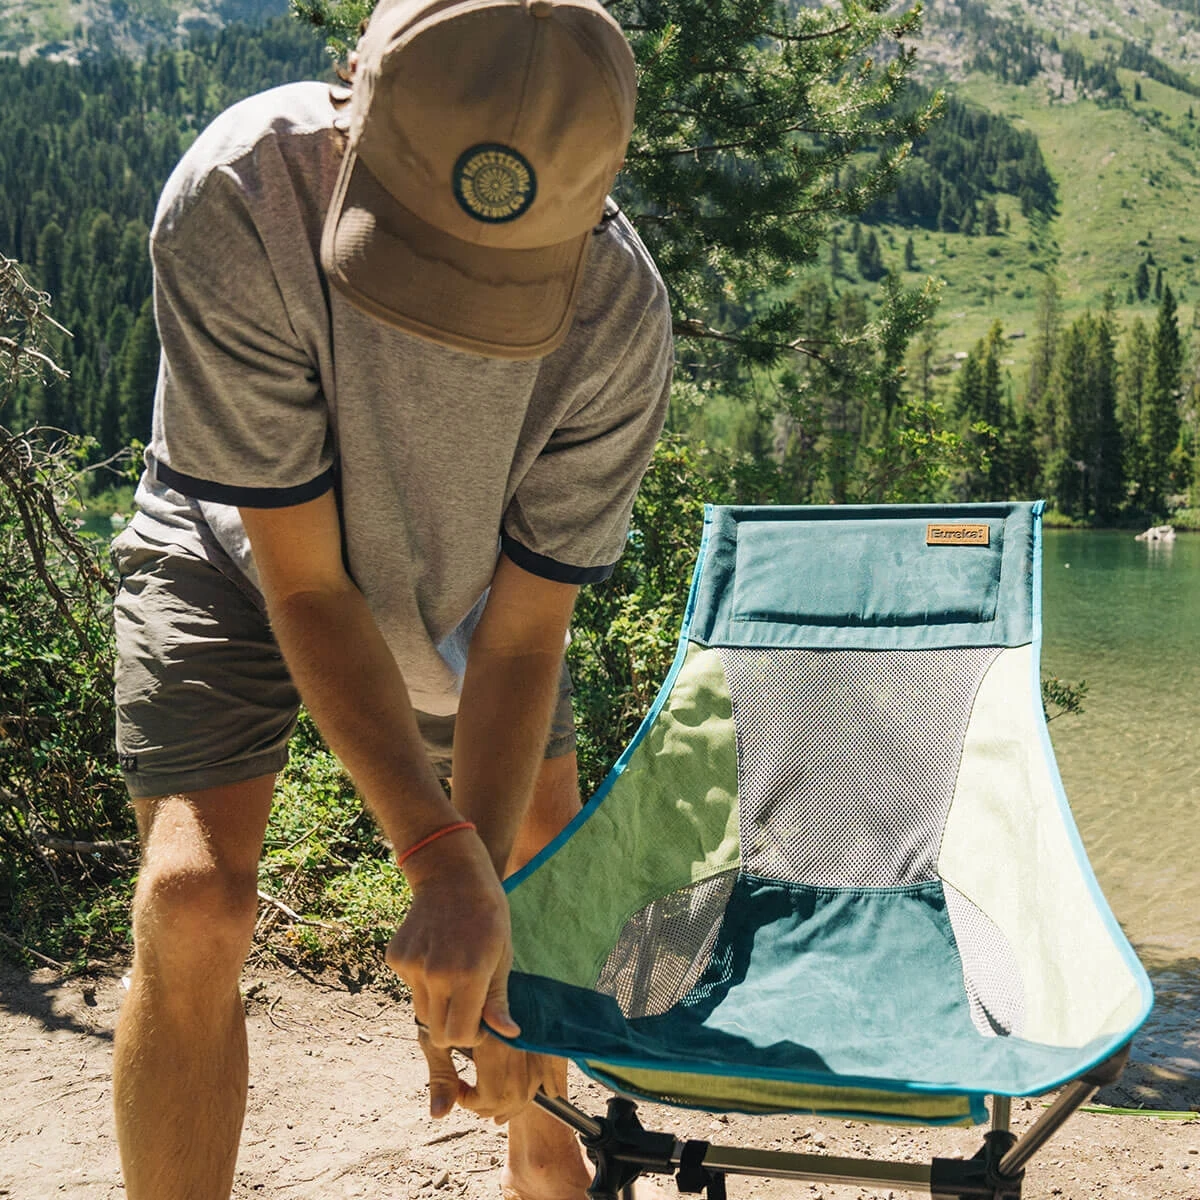 Taking the Eureka! Tagalong Comfort Camp Chair of of carry bag for set up